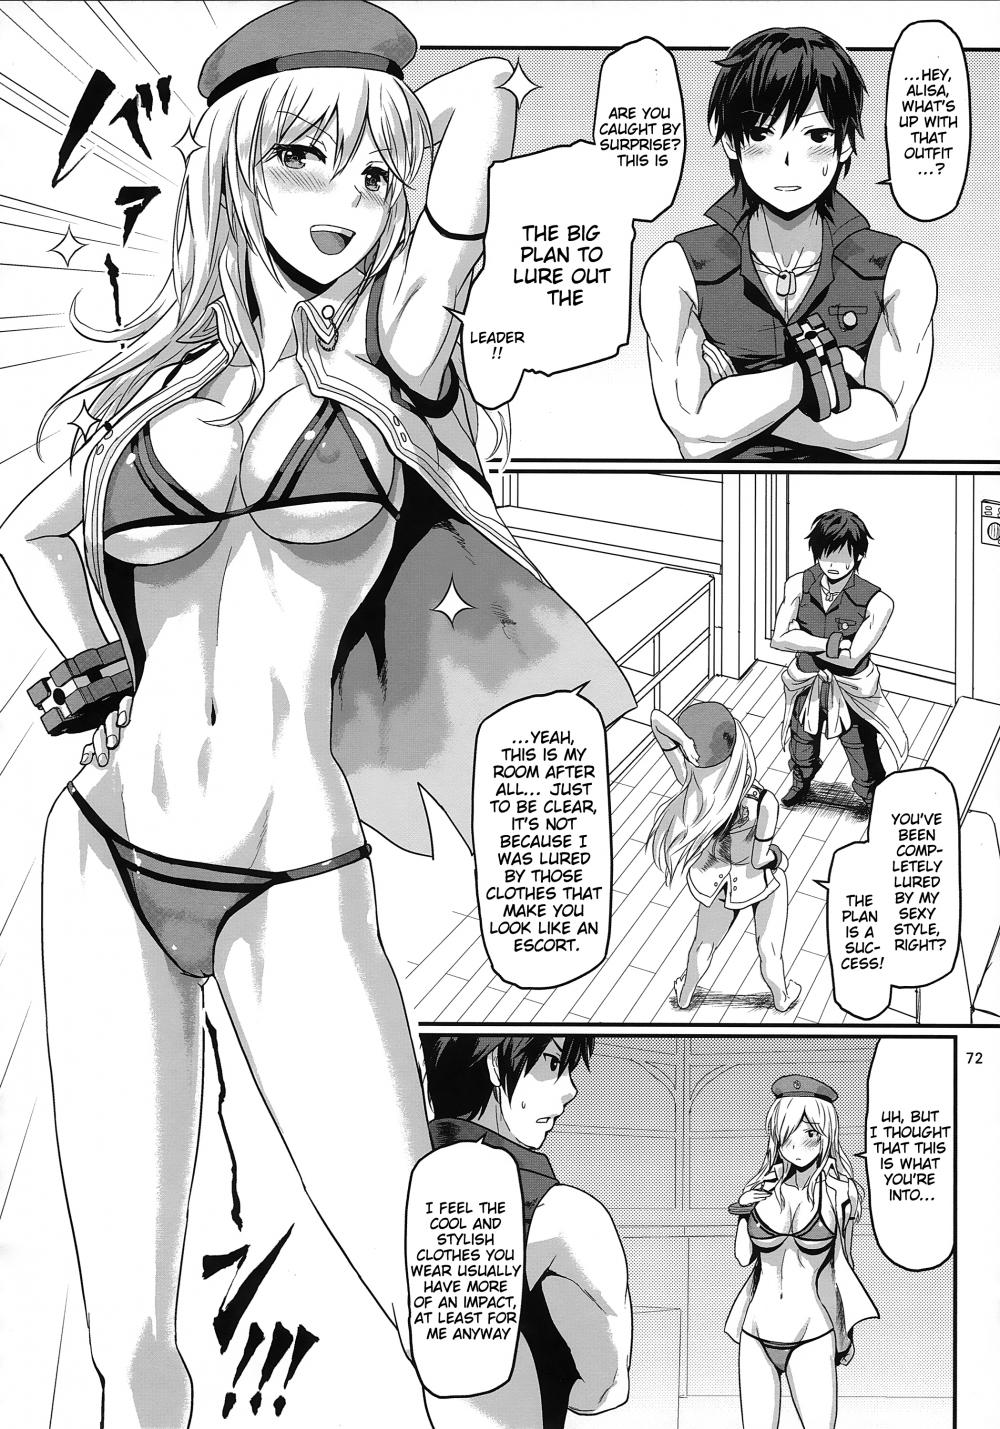 Hentai Manga Comic-The 2nd Battle Plan to Lure Out Lindow!! -Mission Complete!--Chapter 3-1